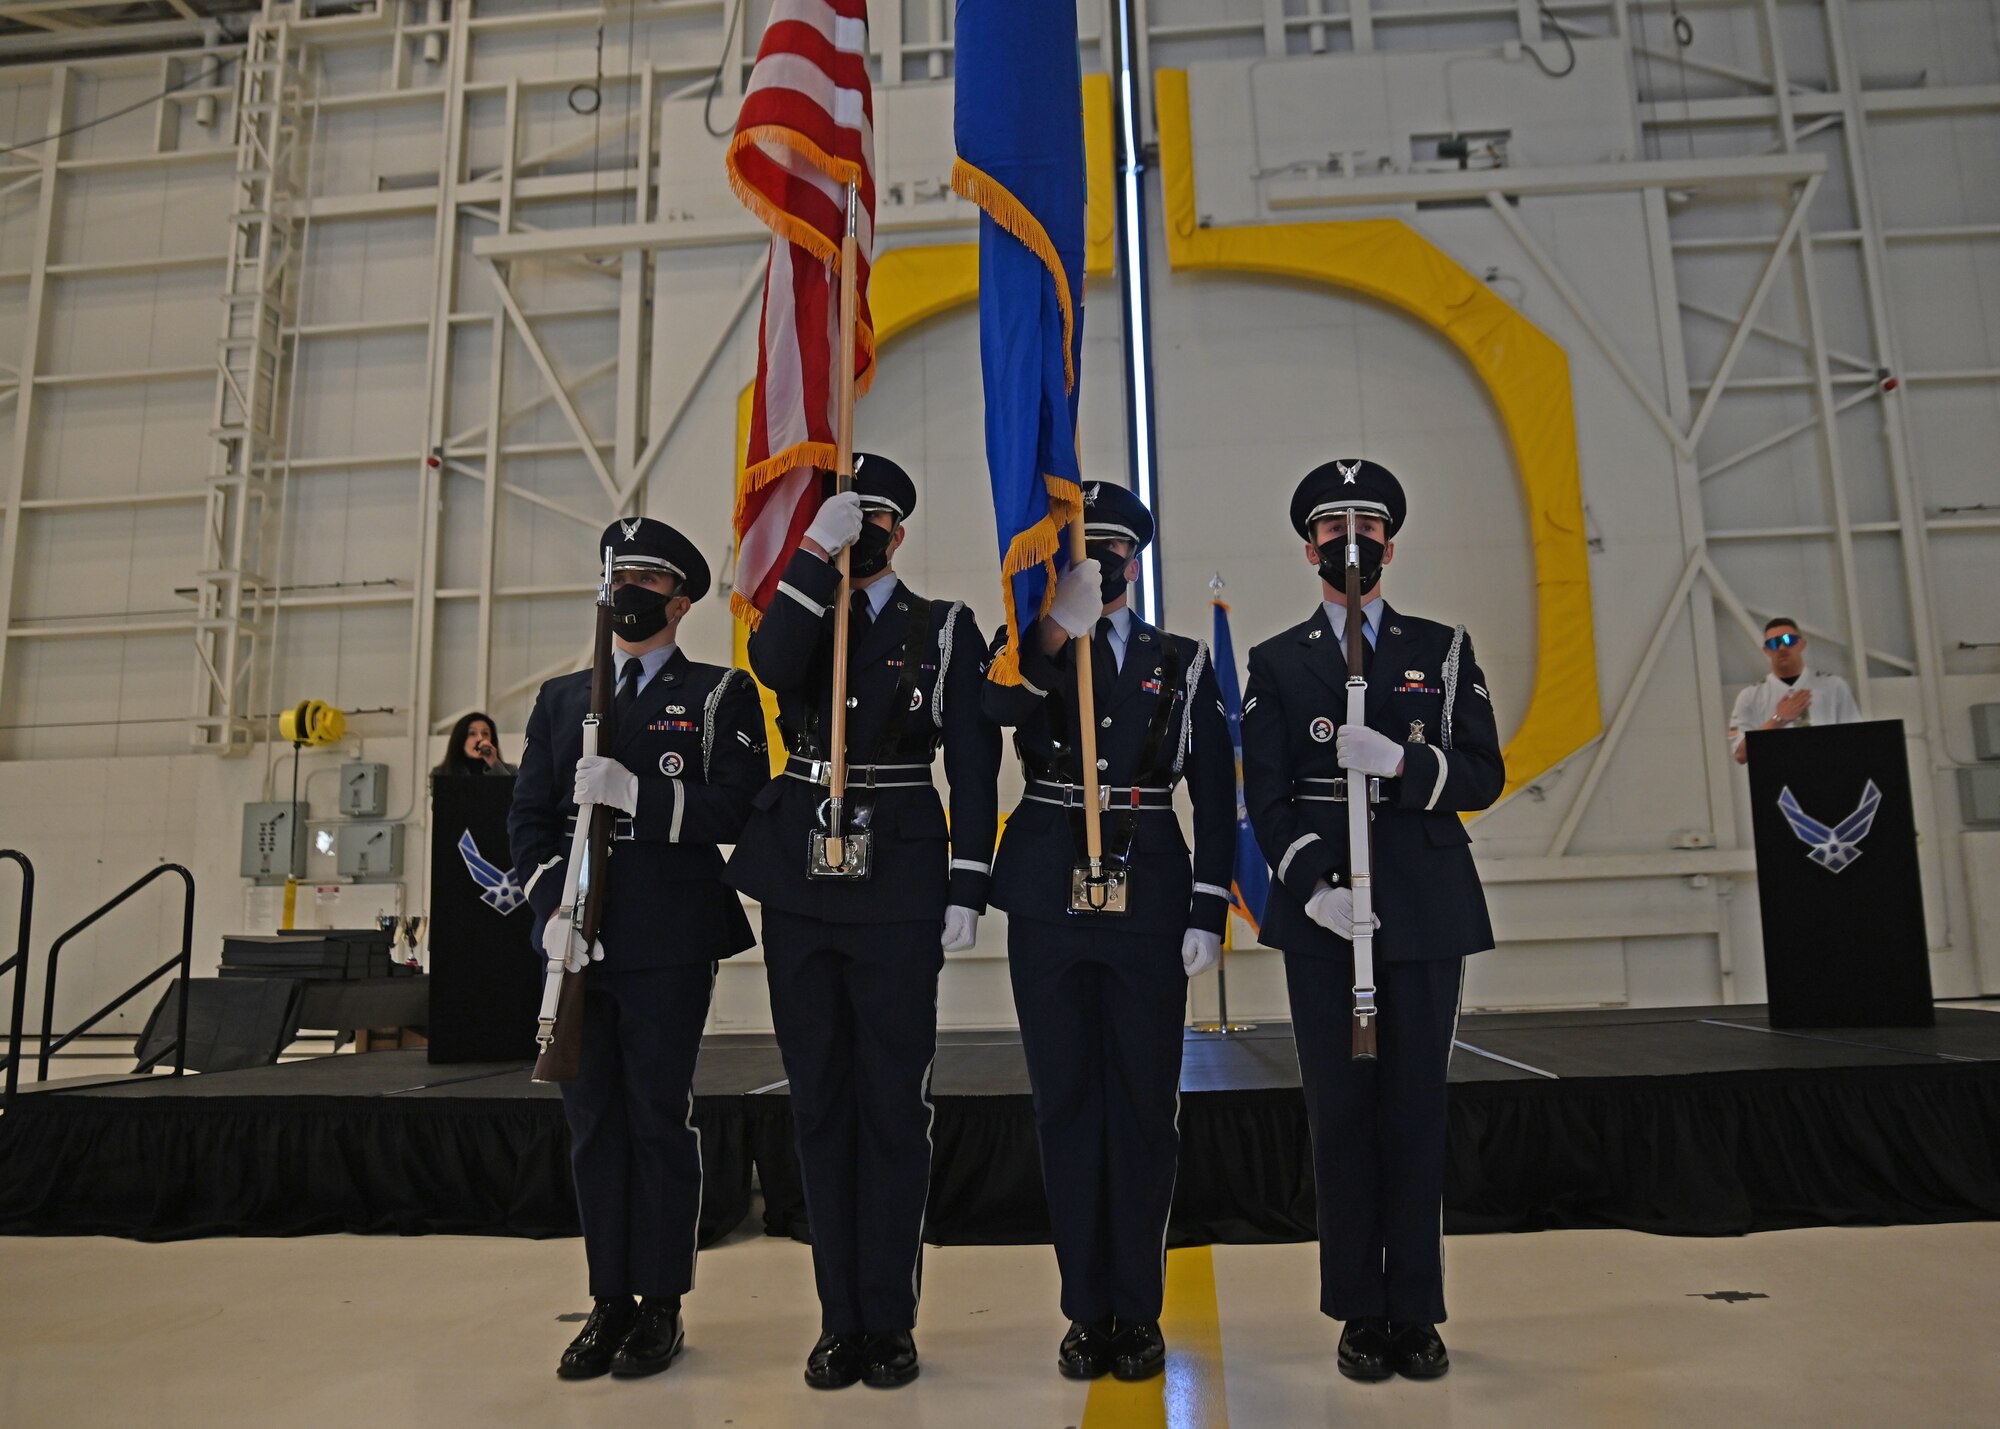 Team McChord Award Winners announced at Joint Base Lewis-McChord, Wash., March 9, 2022. (U.S. Air Force photo by Airman 1st Class Callie Norton)